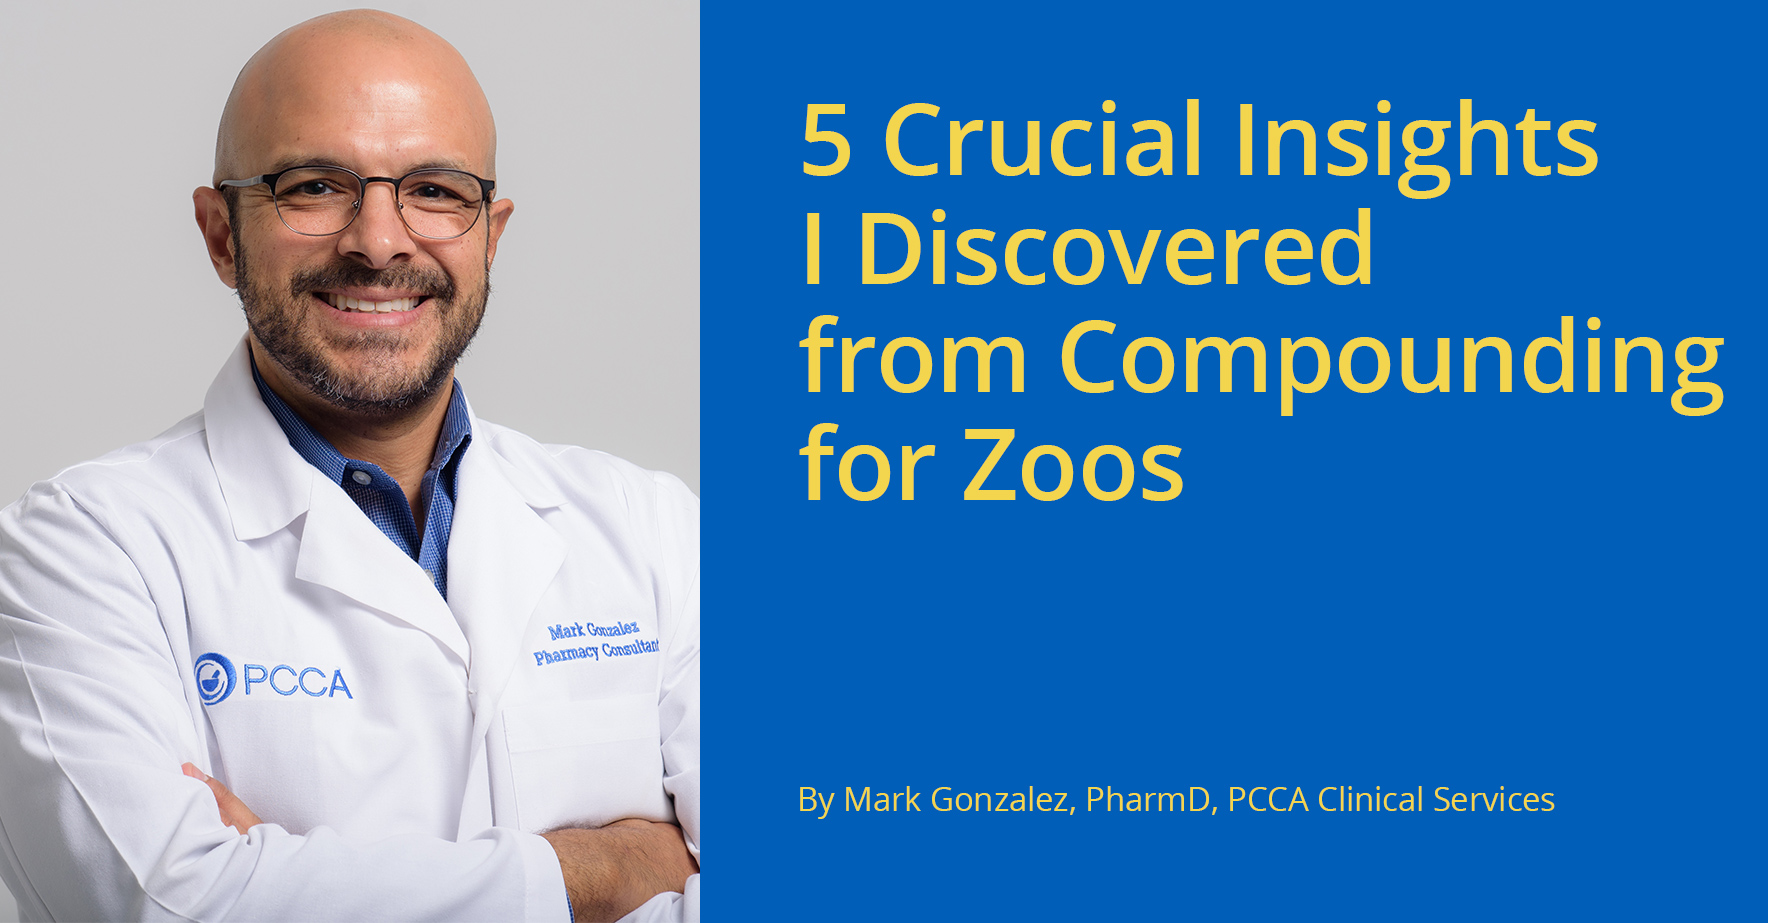 5 _crucial_insights_i_discovered_from_compounding_for_zoos.jpg